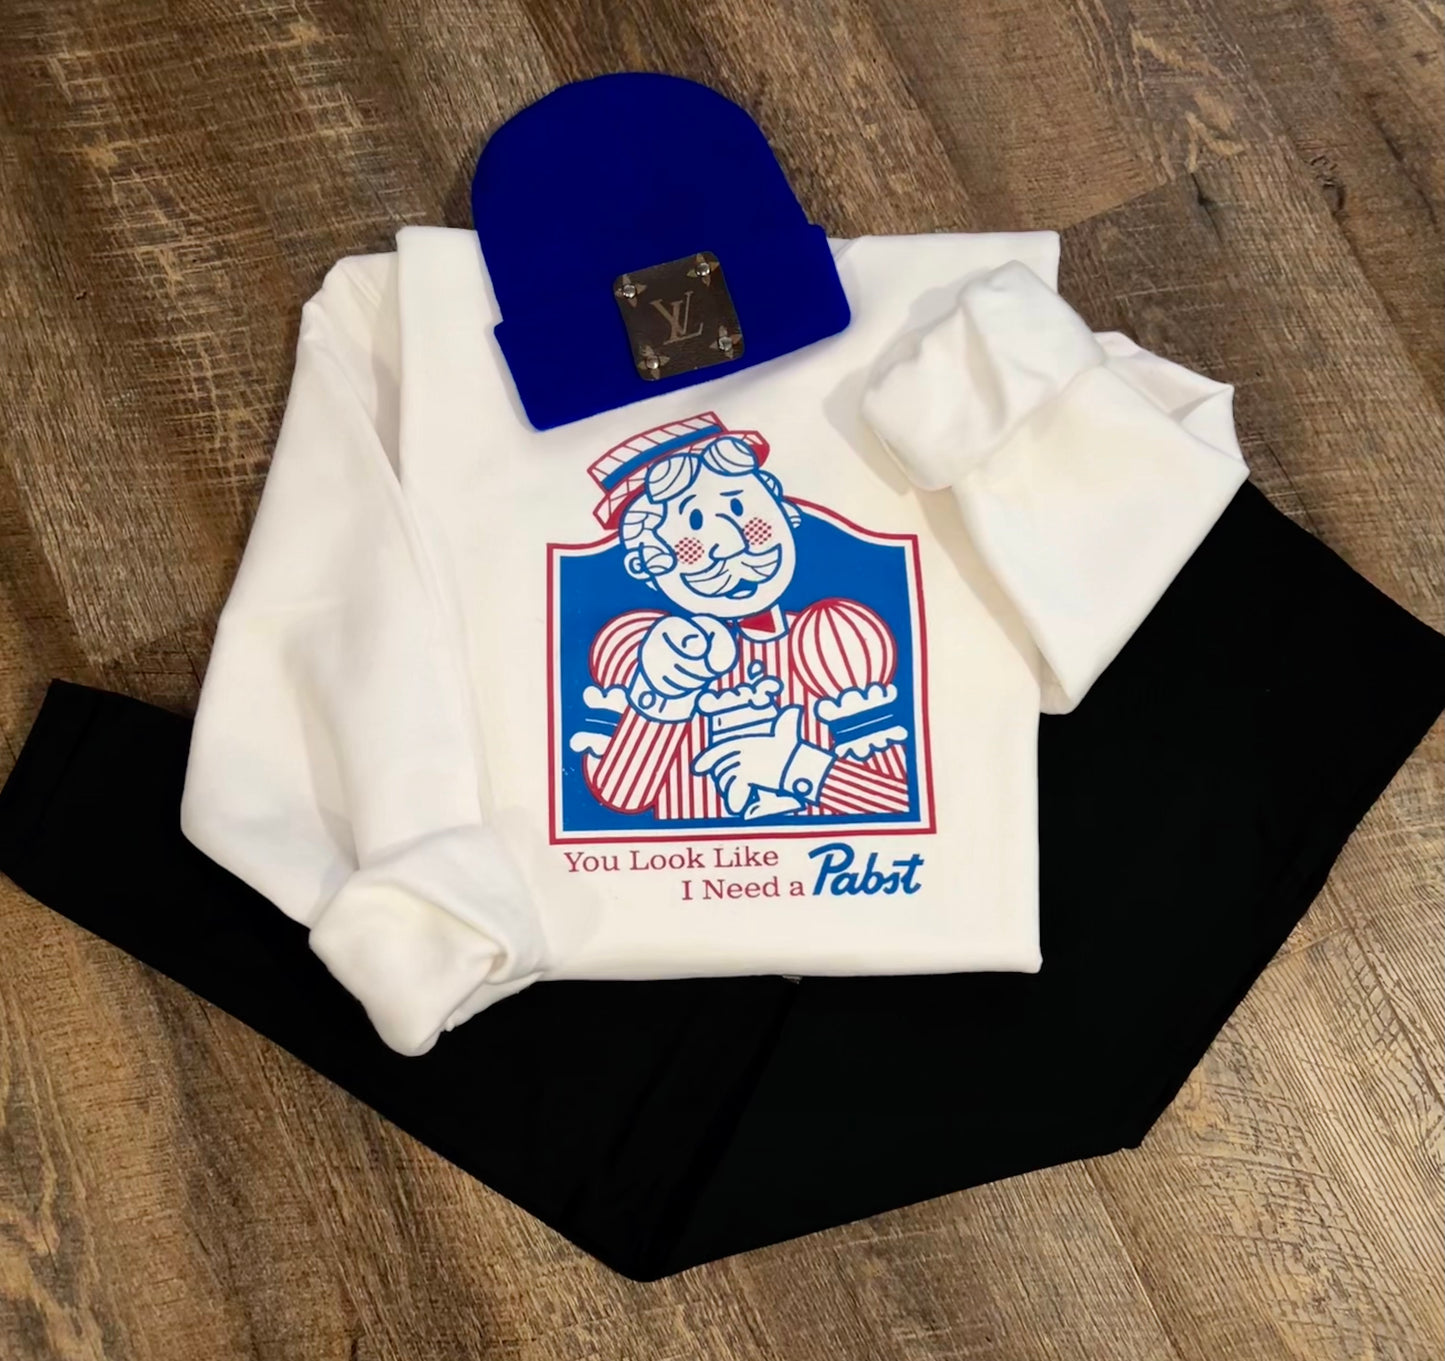 Pabst Sweater